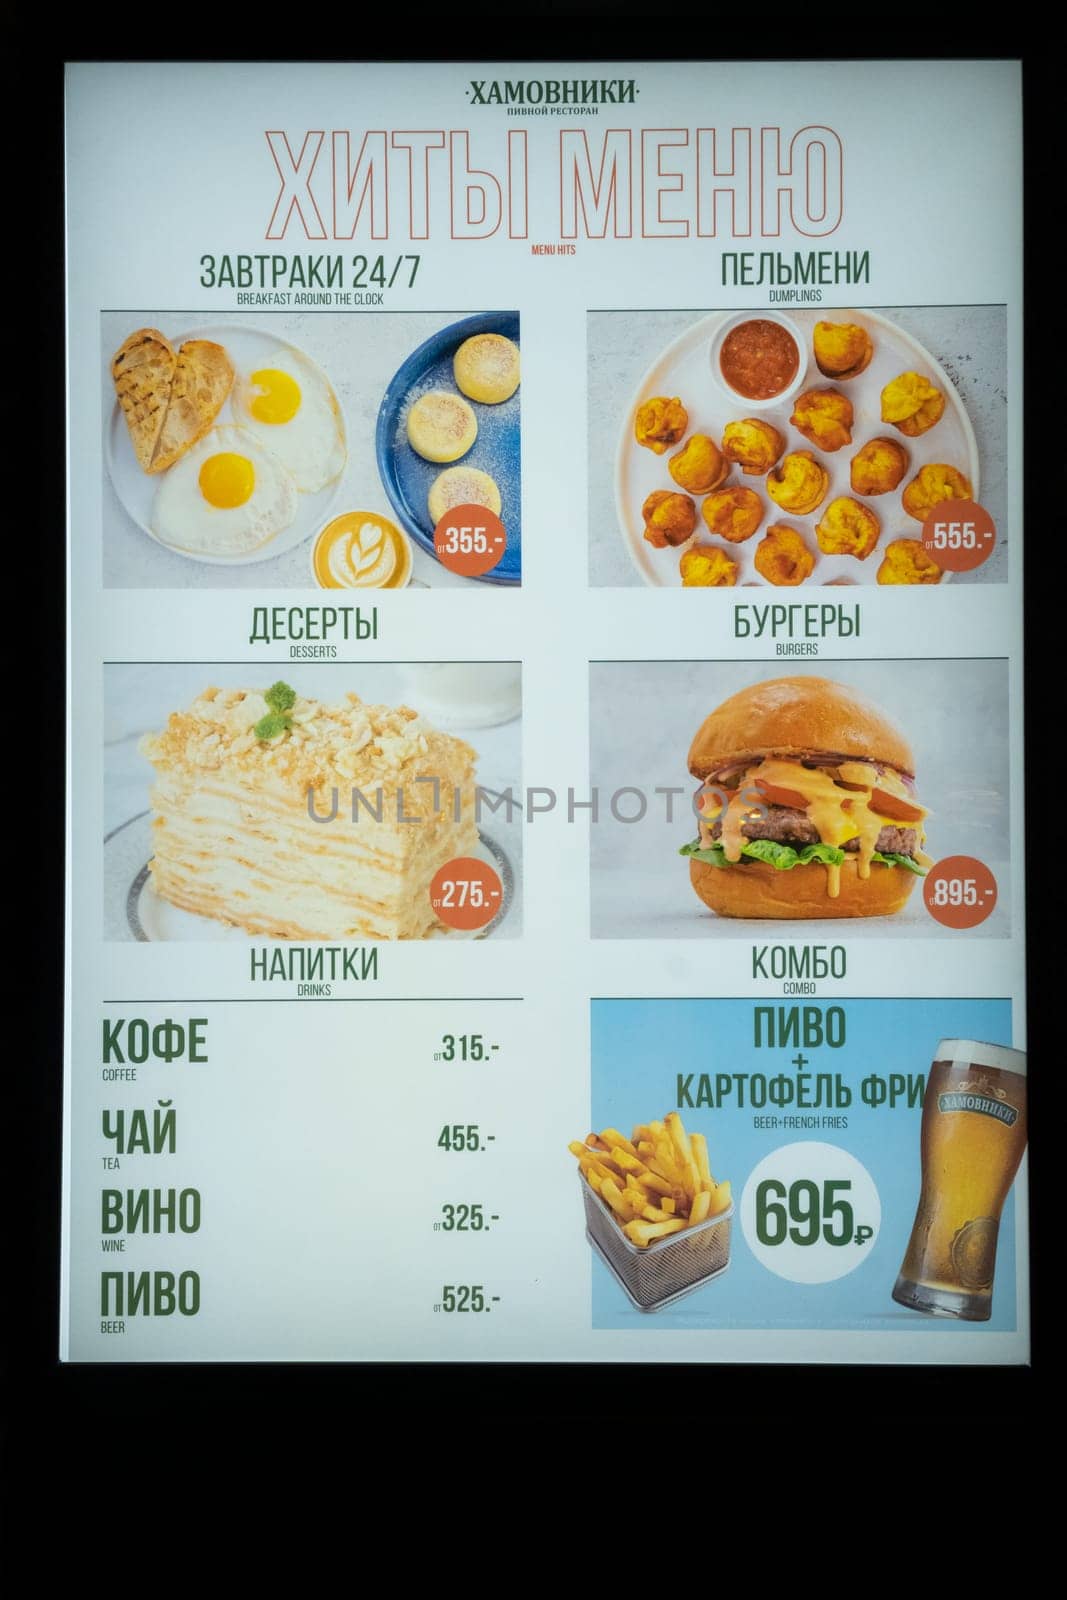 A sign with the menu of the Khamovniki restaurant at the airport by AnatoliiFoto